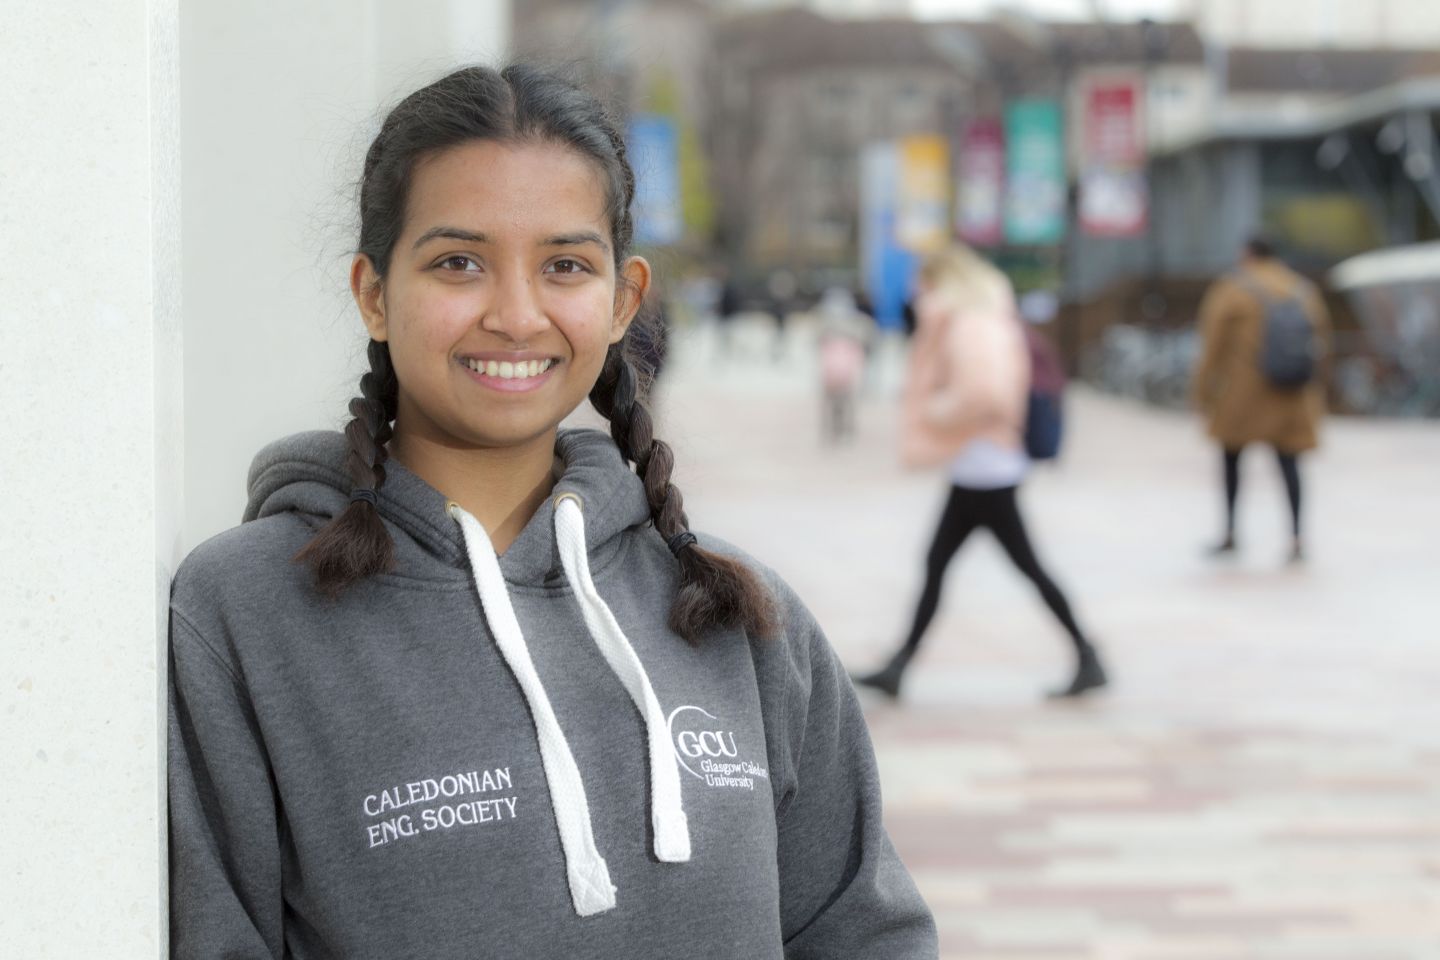 Student on campus at Glasgow Caledonian University